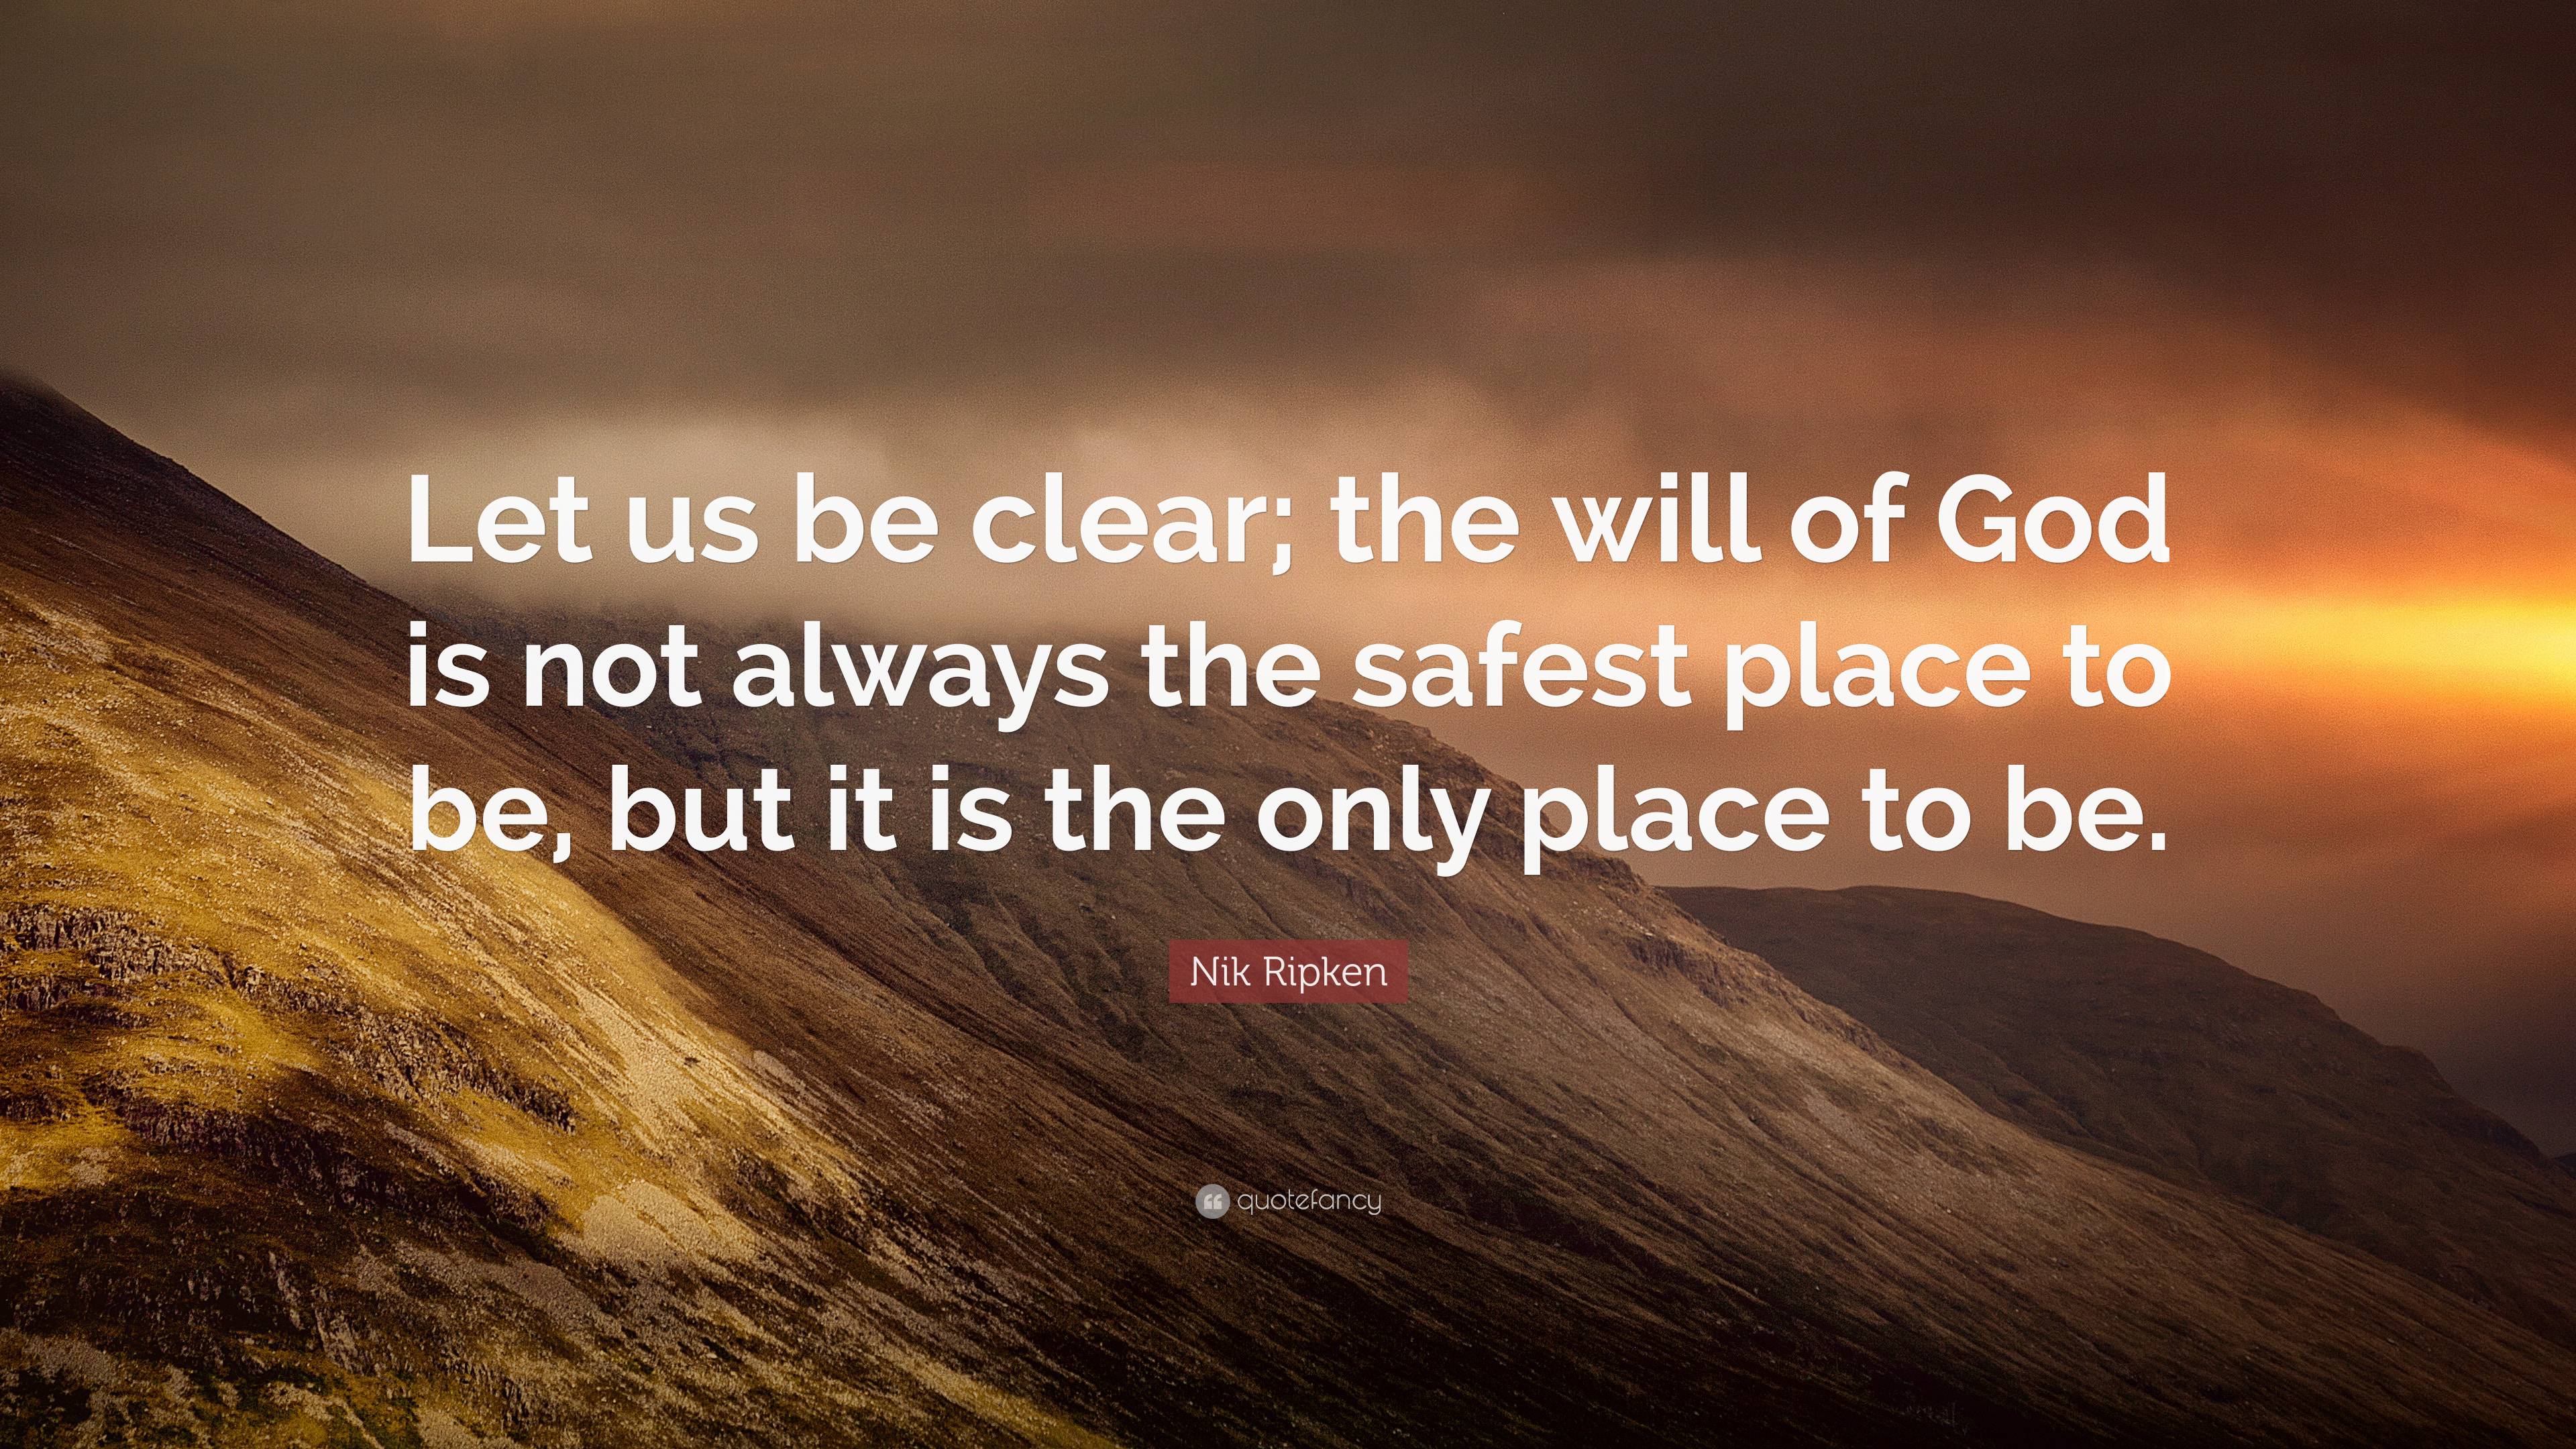 Nik Ripken Quote: “Let us be clear; the will of God is not always the ...